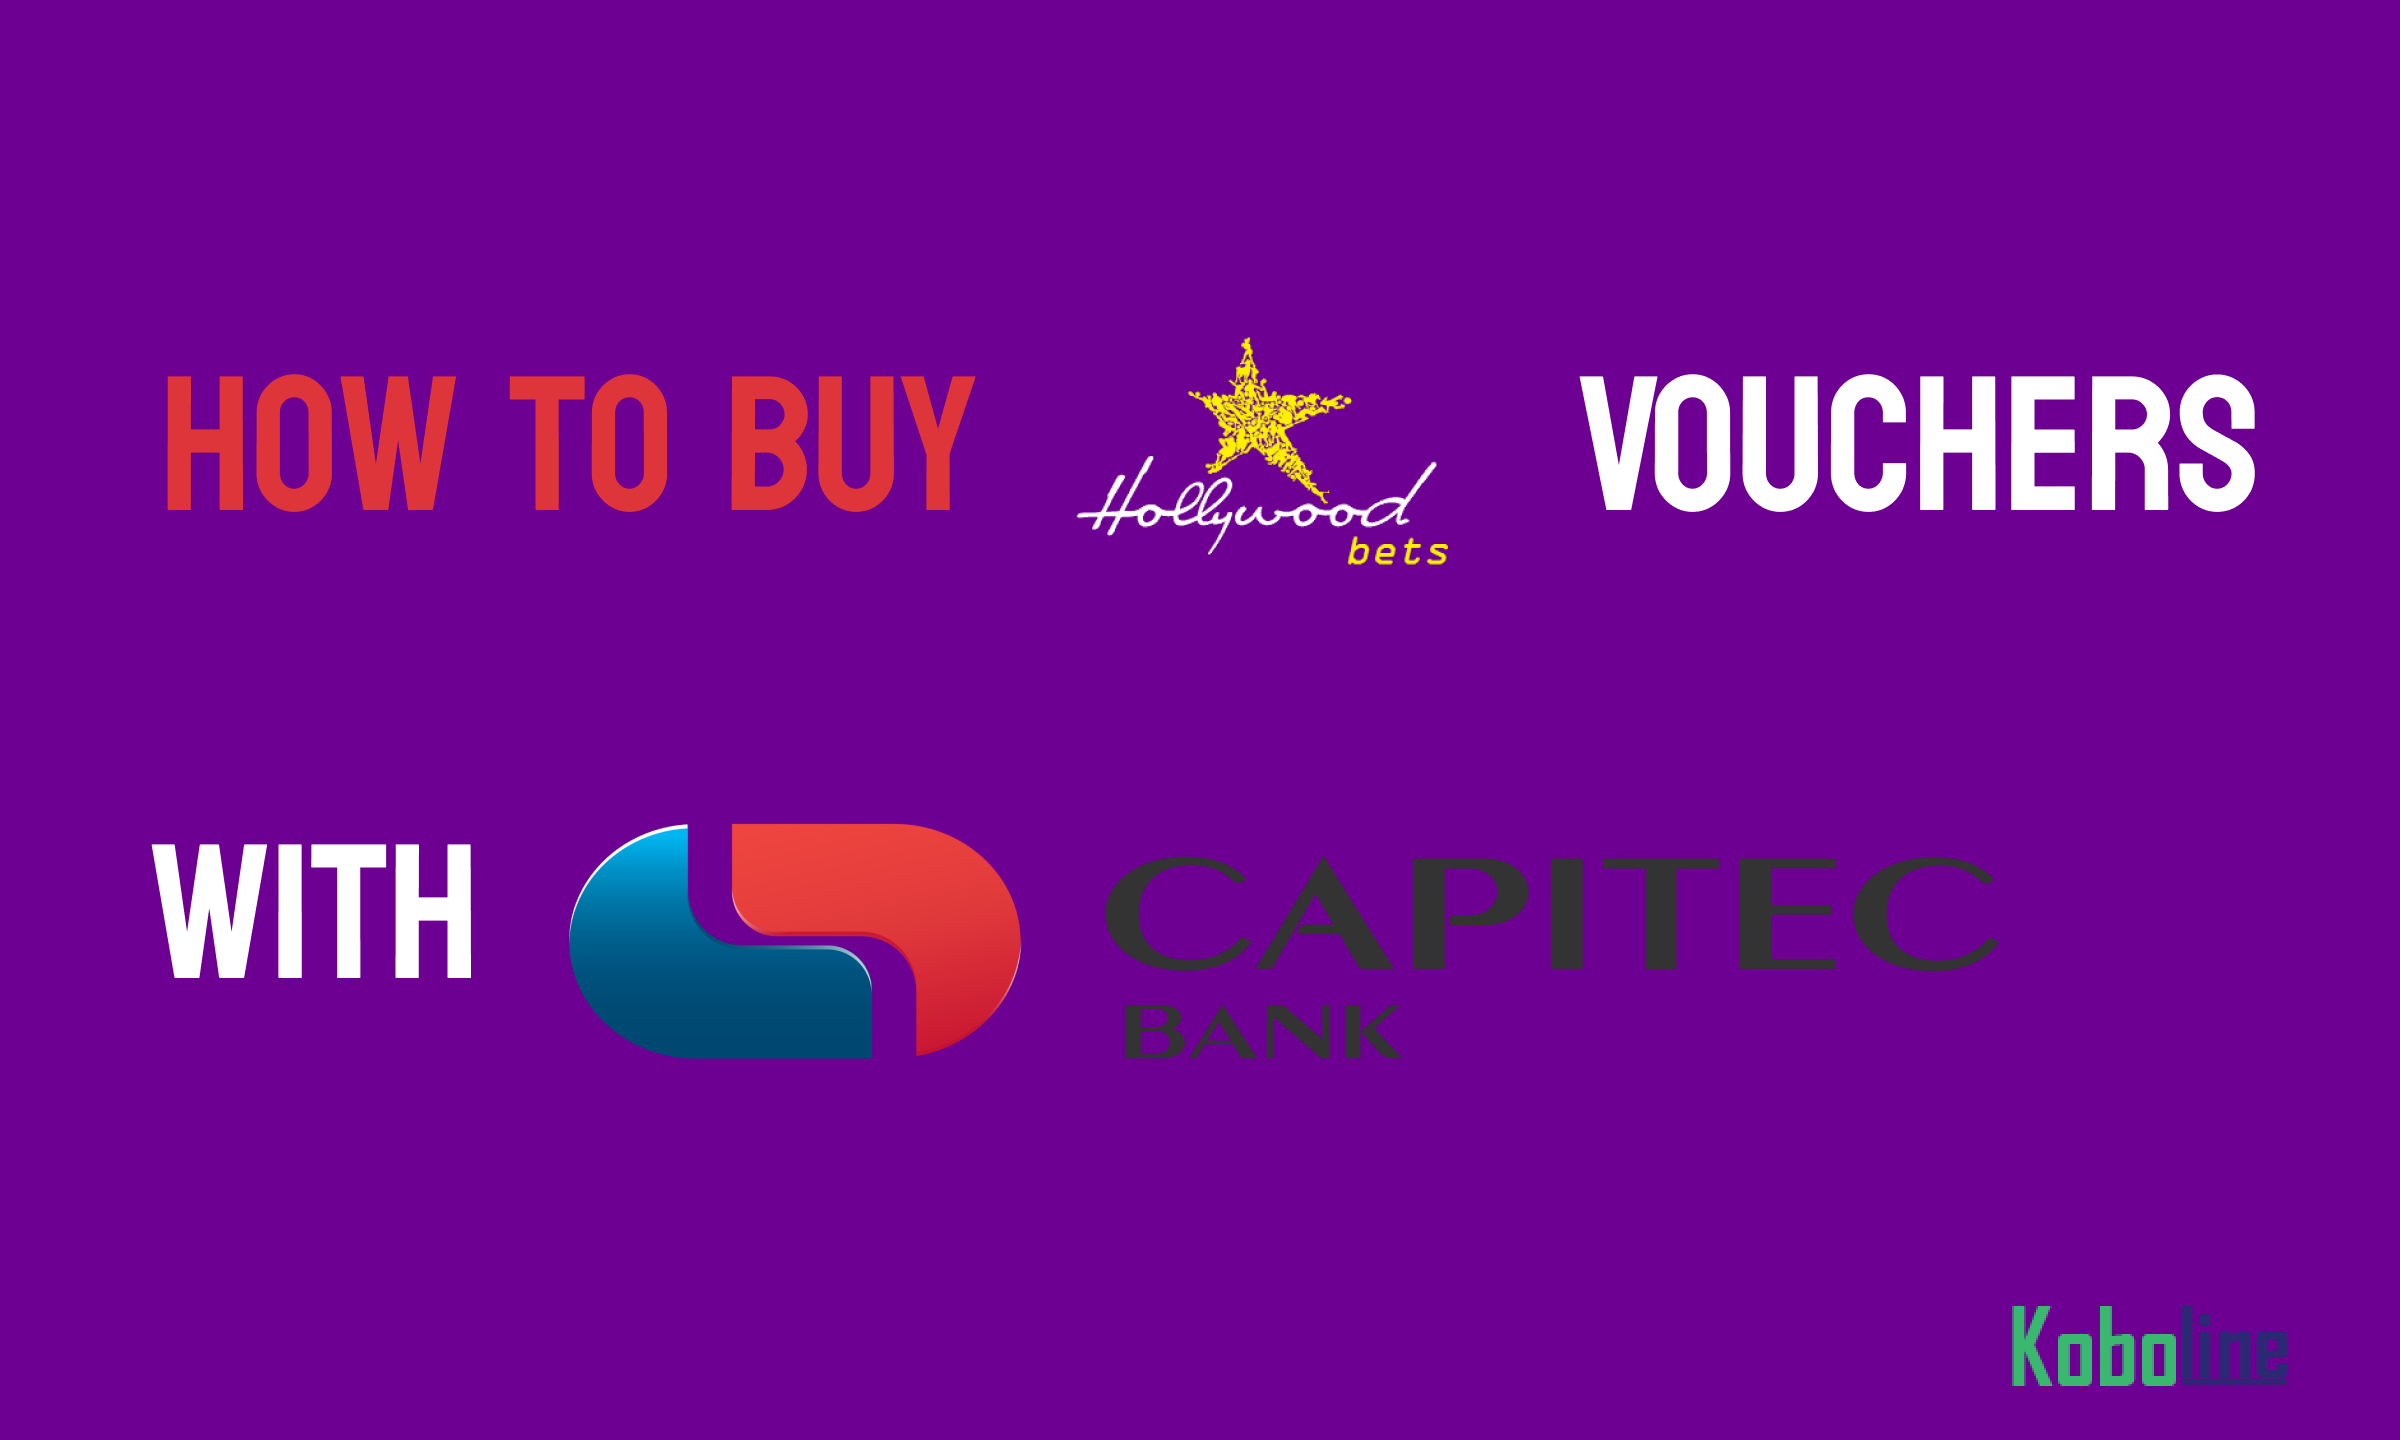 how to buy hollywood voucher with capitec bank app